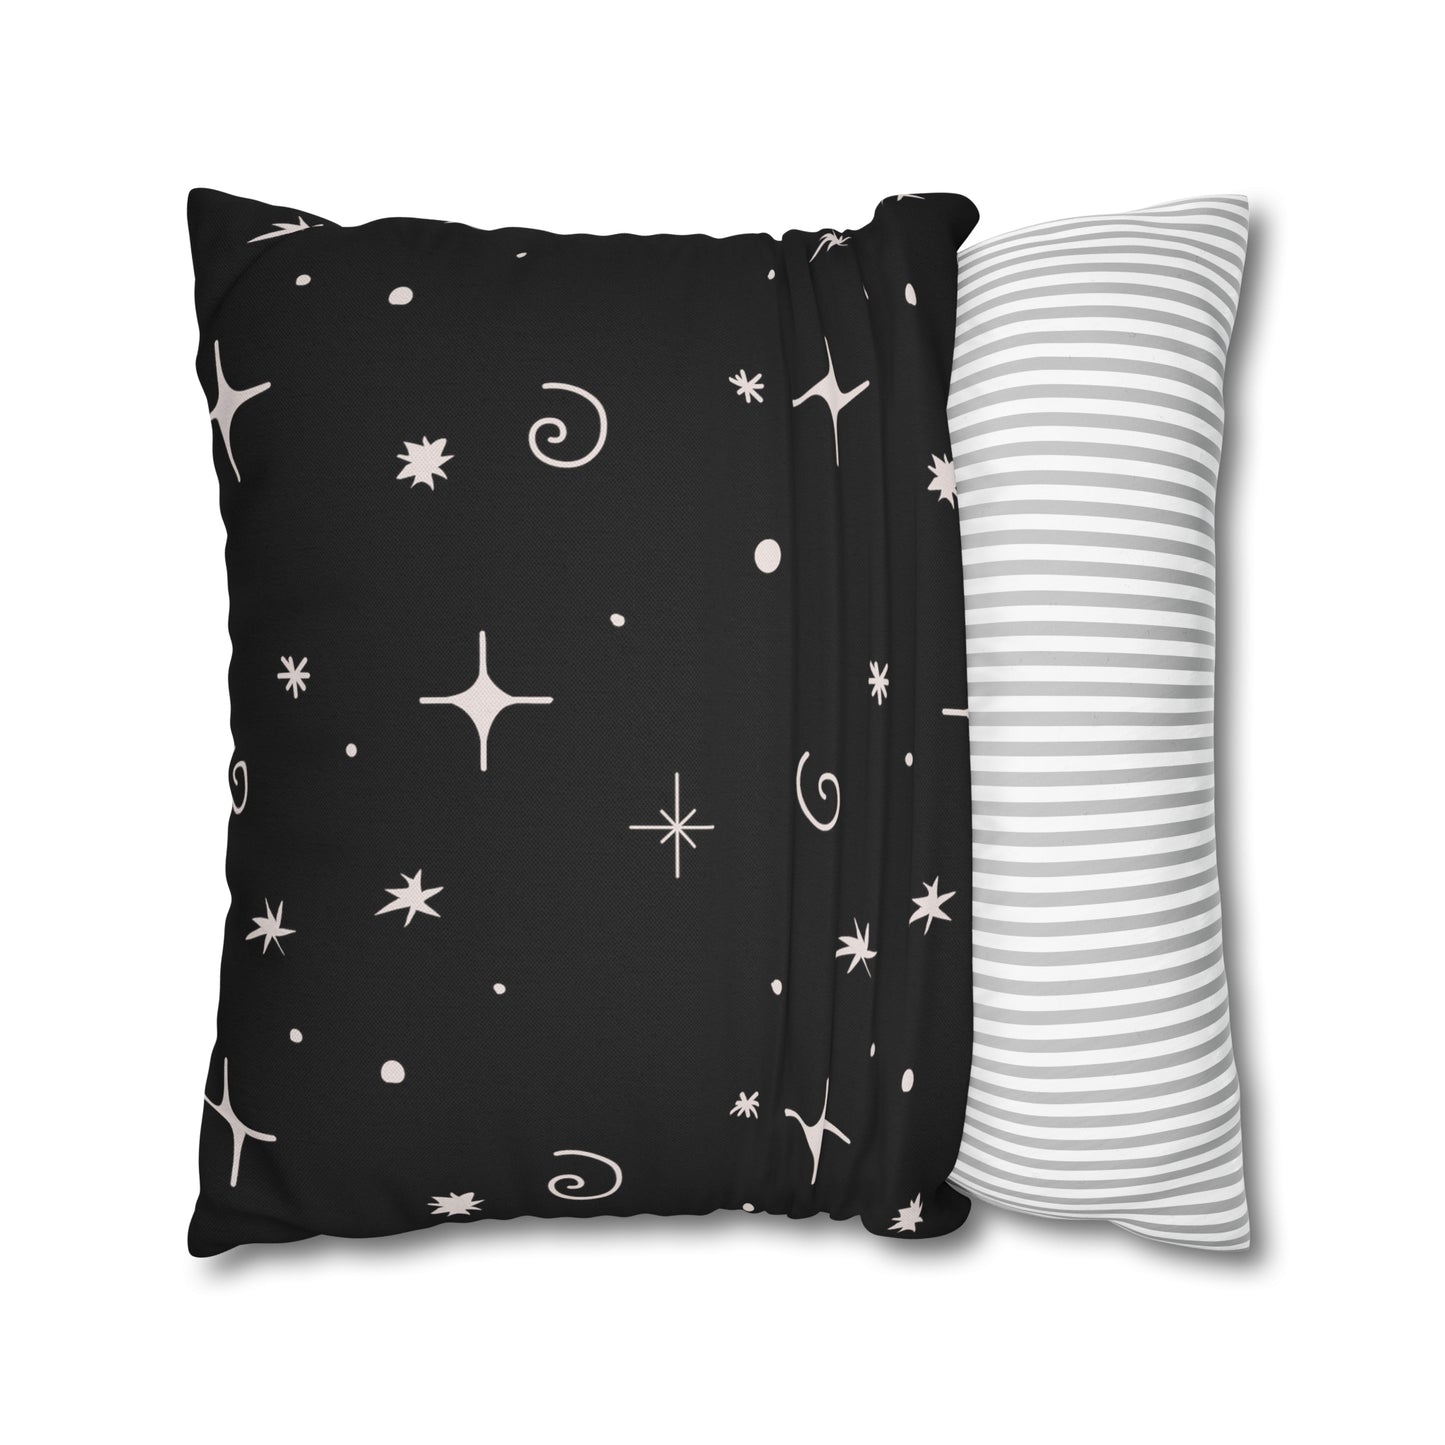 Smiling Earth Spun Polyester Square Pillowcase, You Are Our World Pillow, STEM Collection Throw Pillow